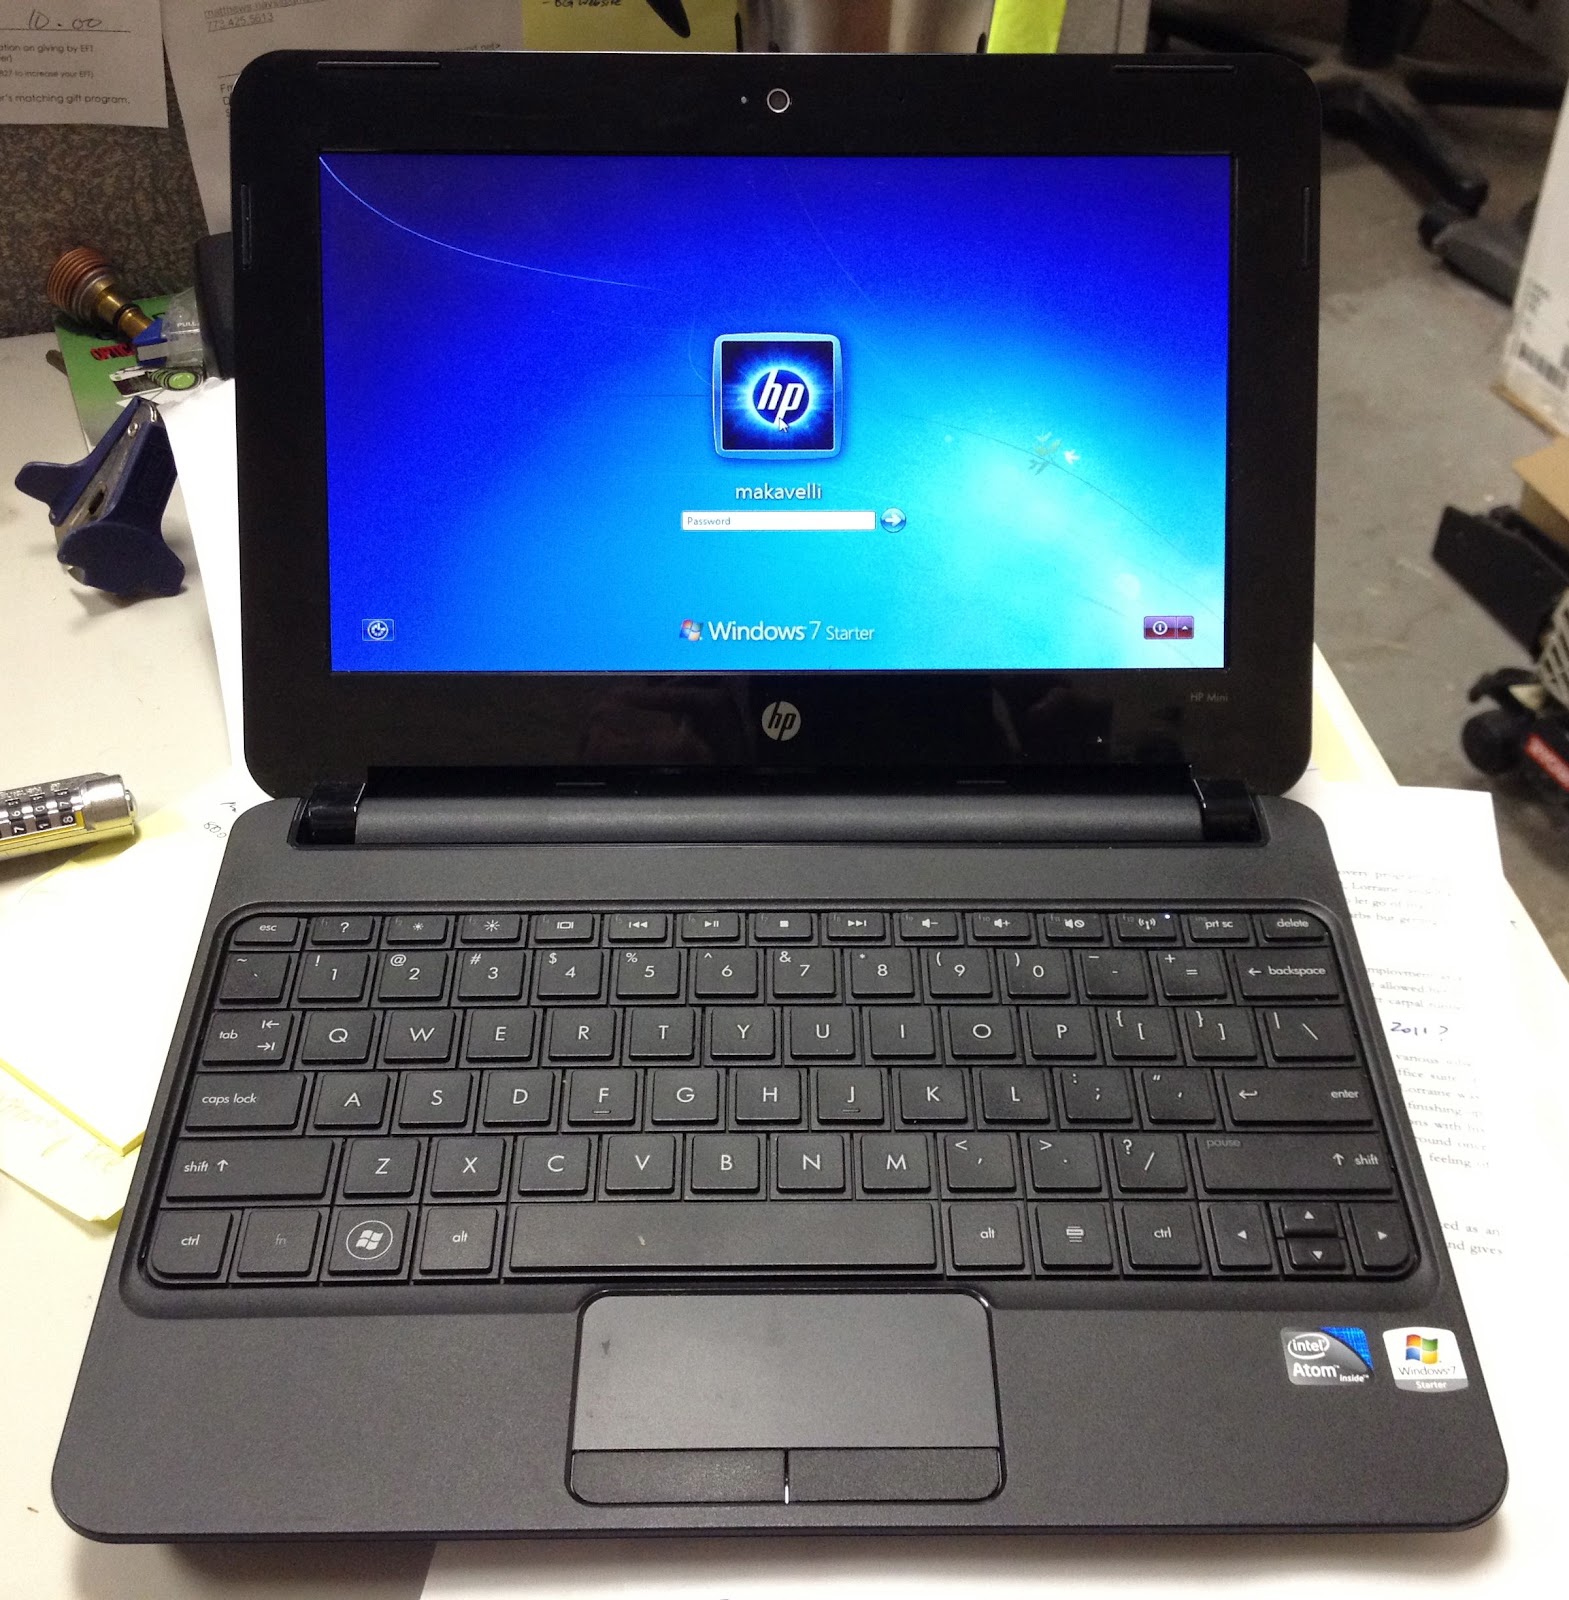 windows 7 for hp laptop